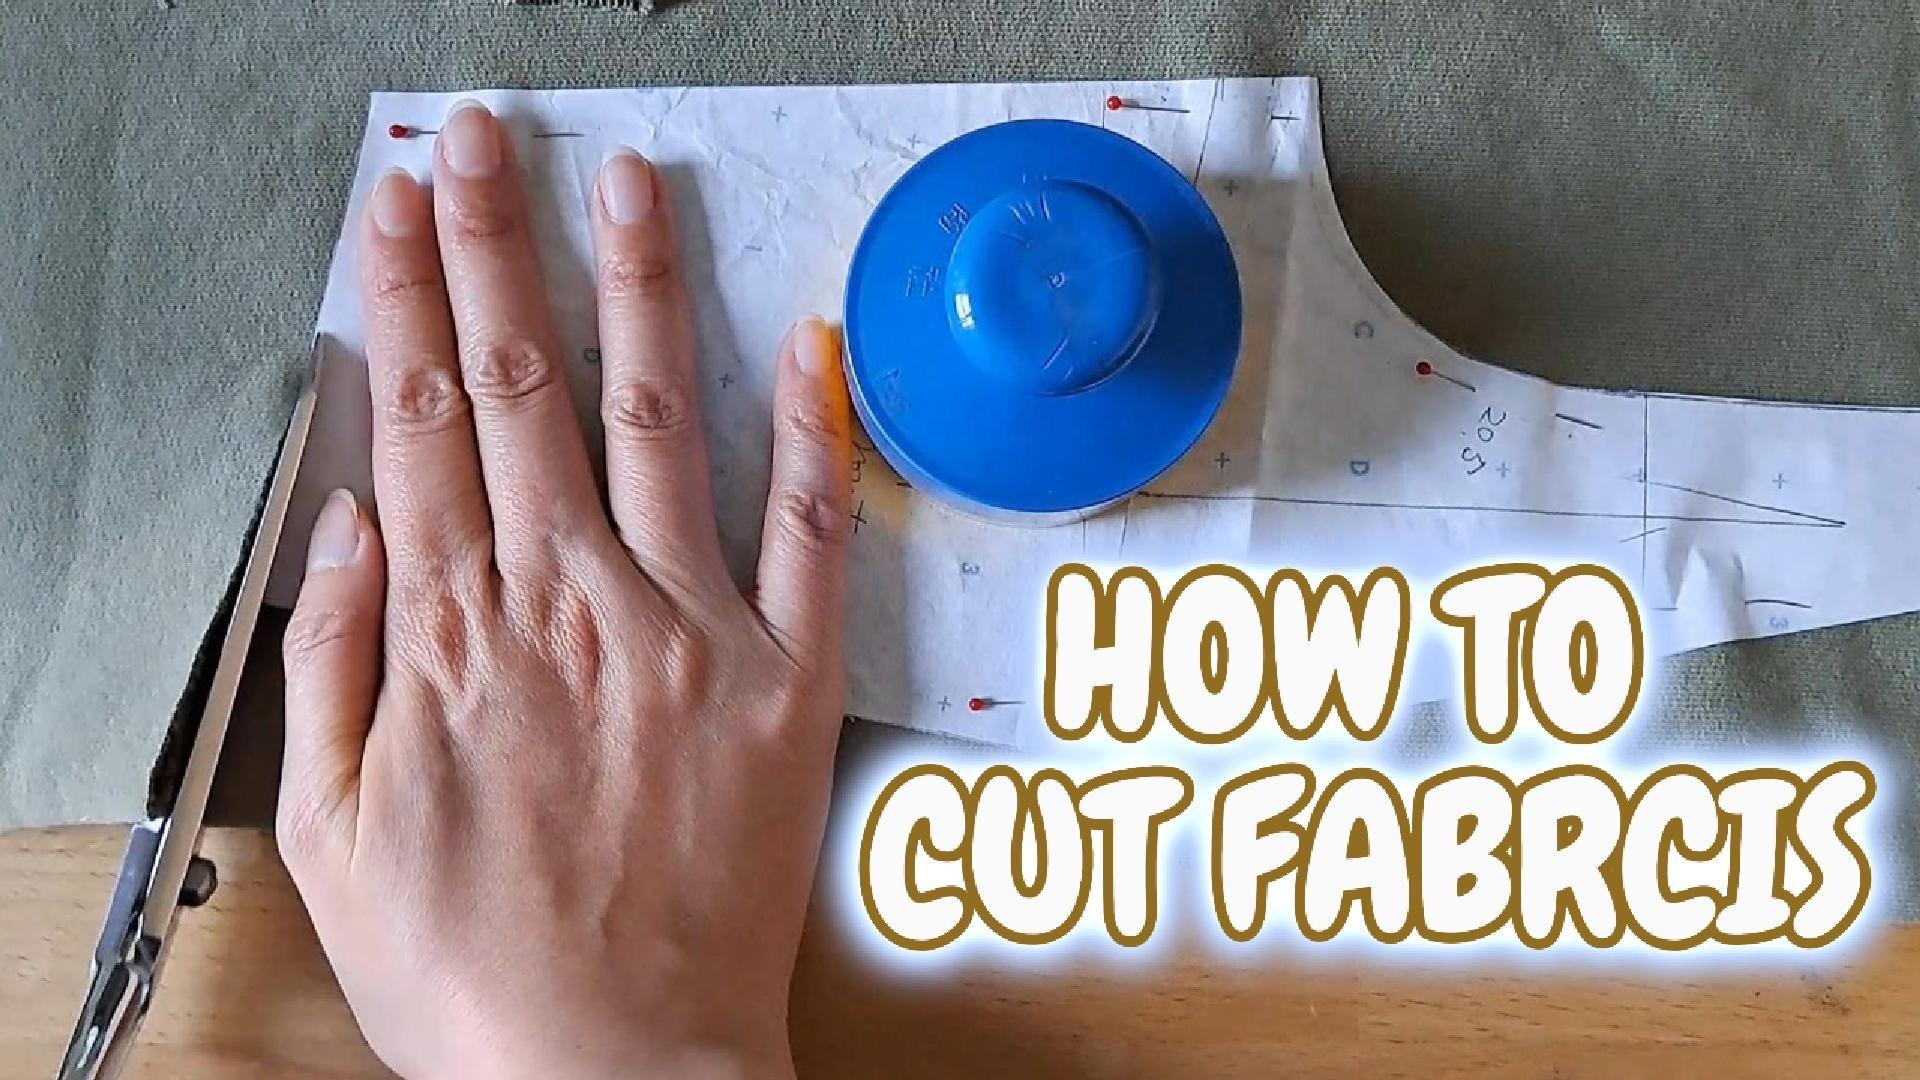 How to cut fabrics with scissors